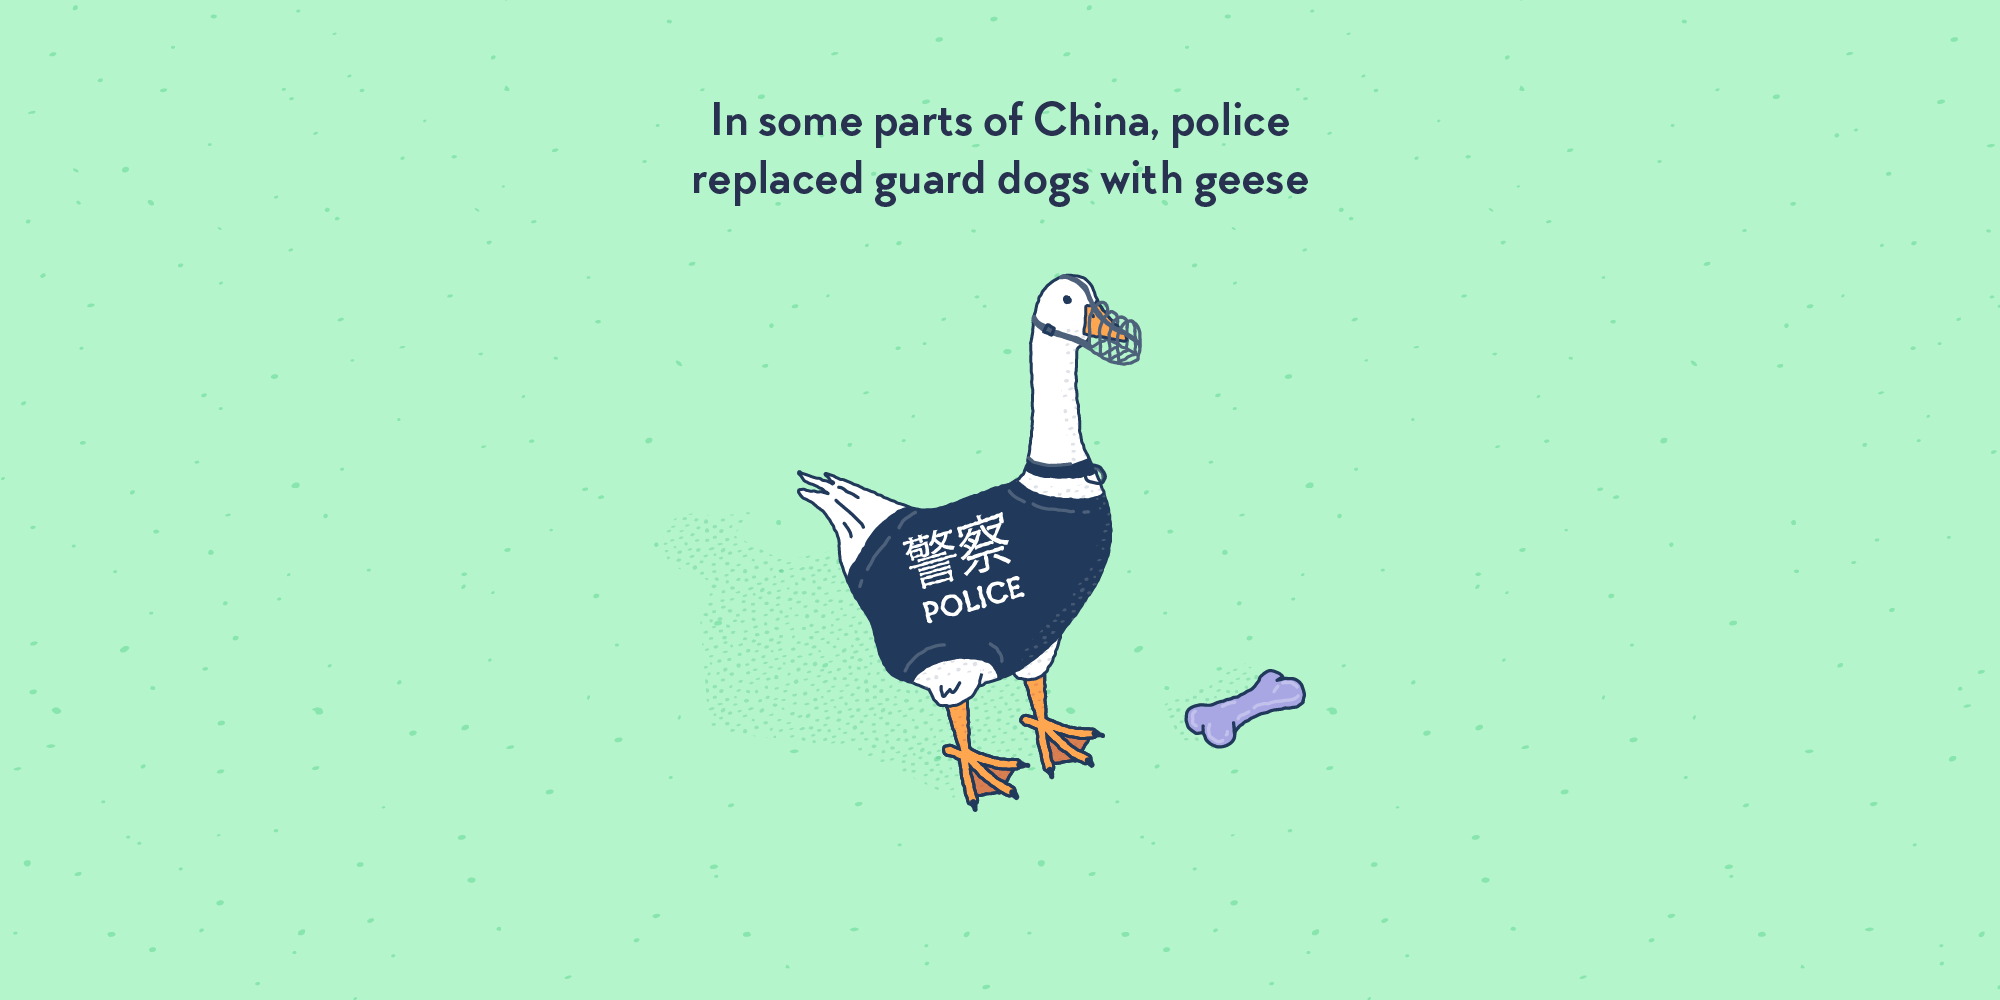 A goose dressed like a police dog, with black outfit reading “POLICE” and a muzzle.